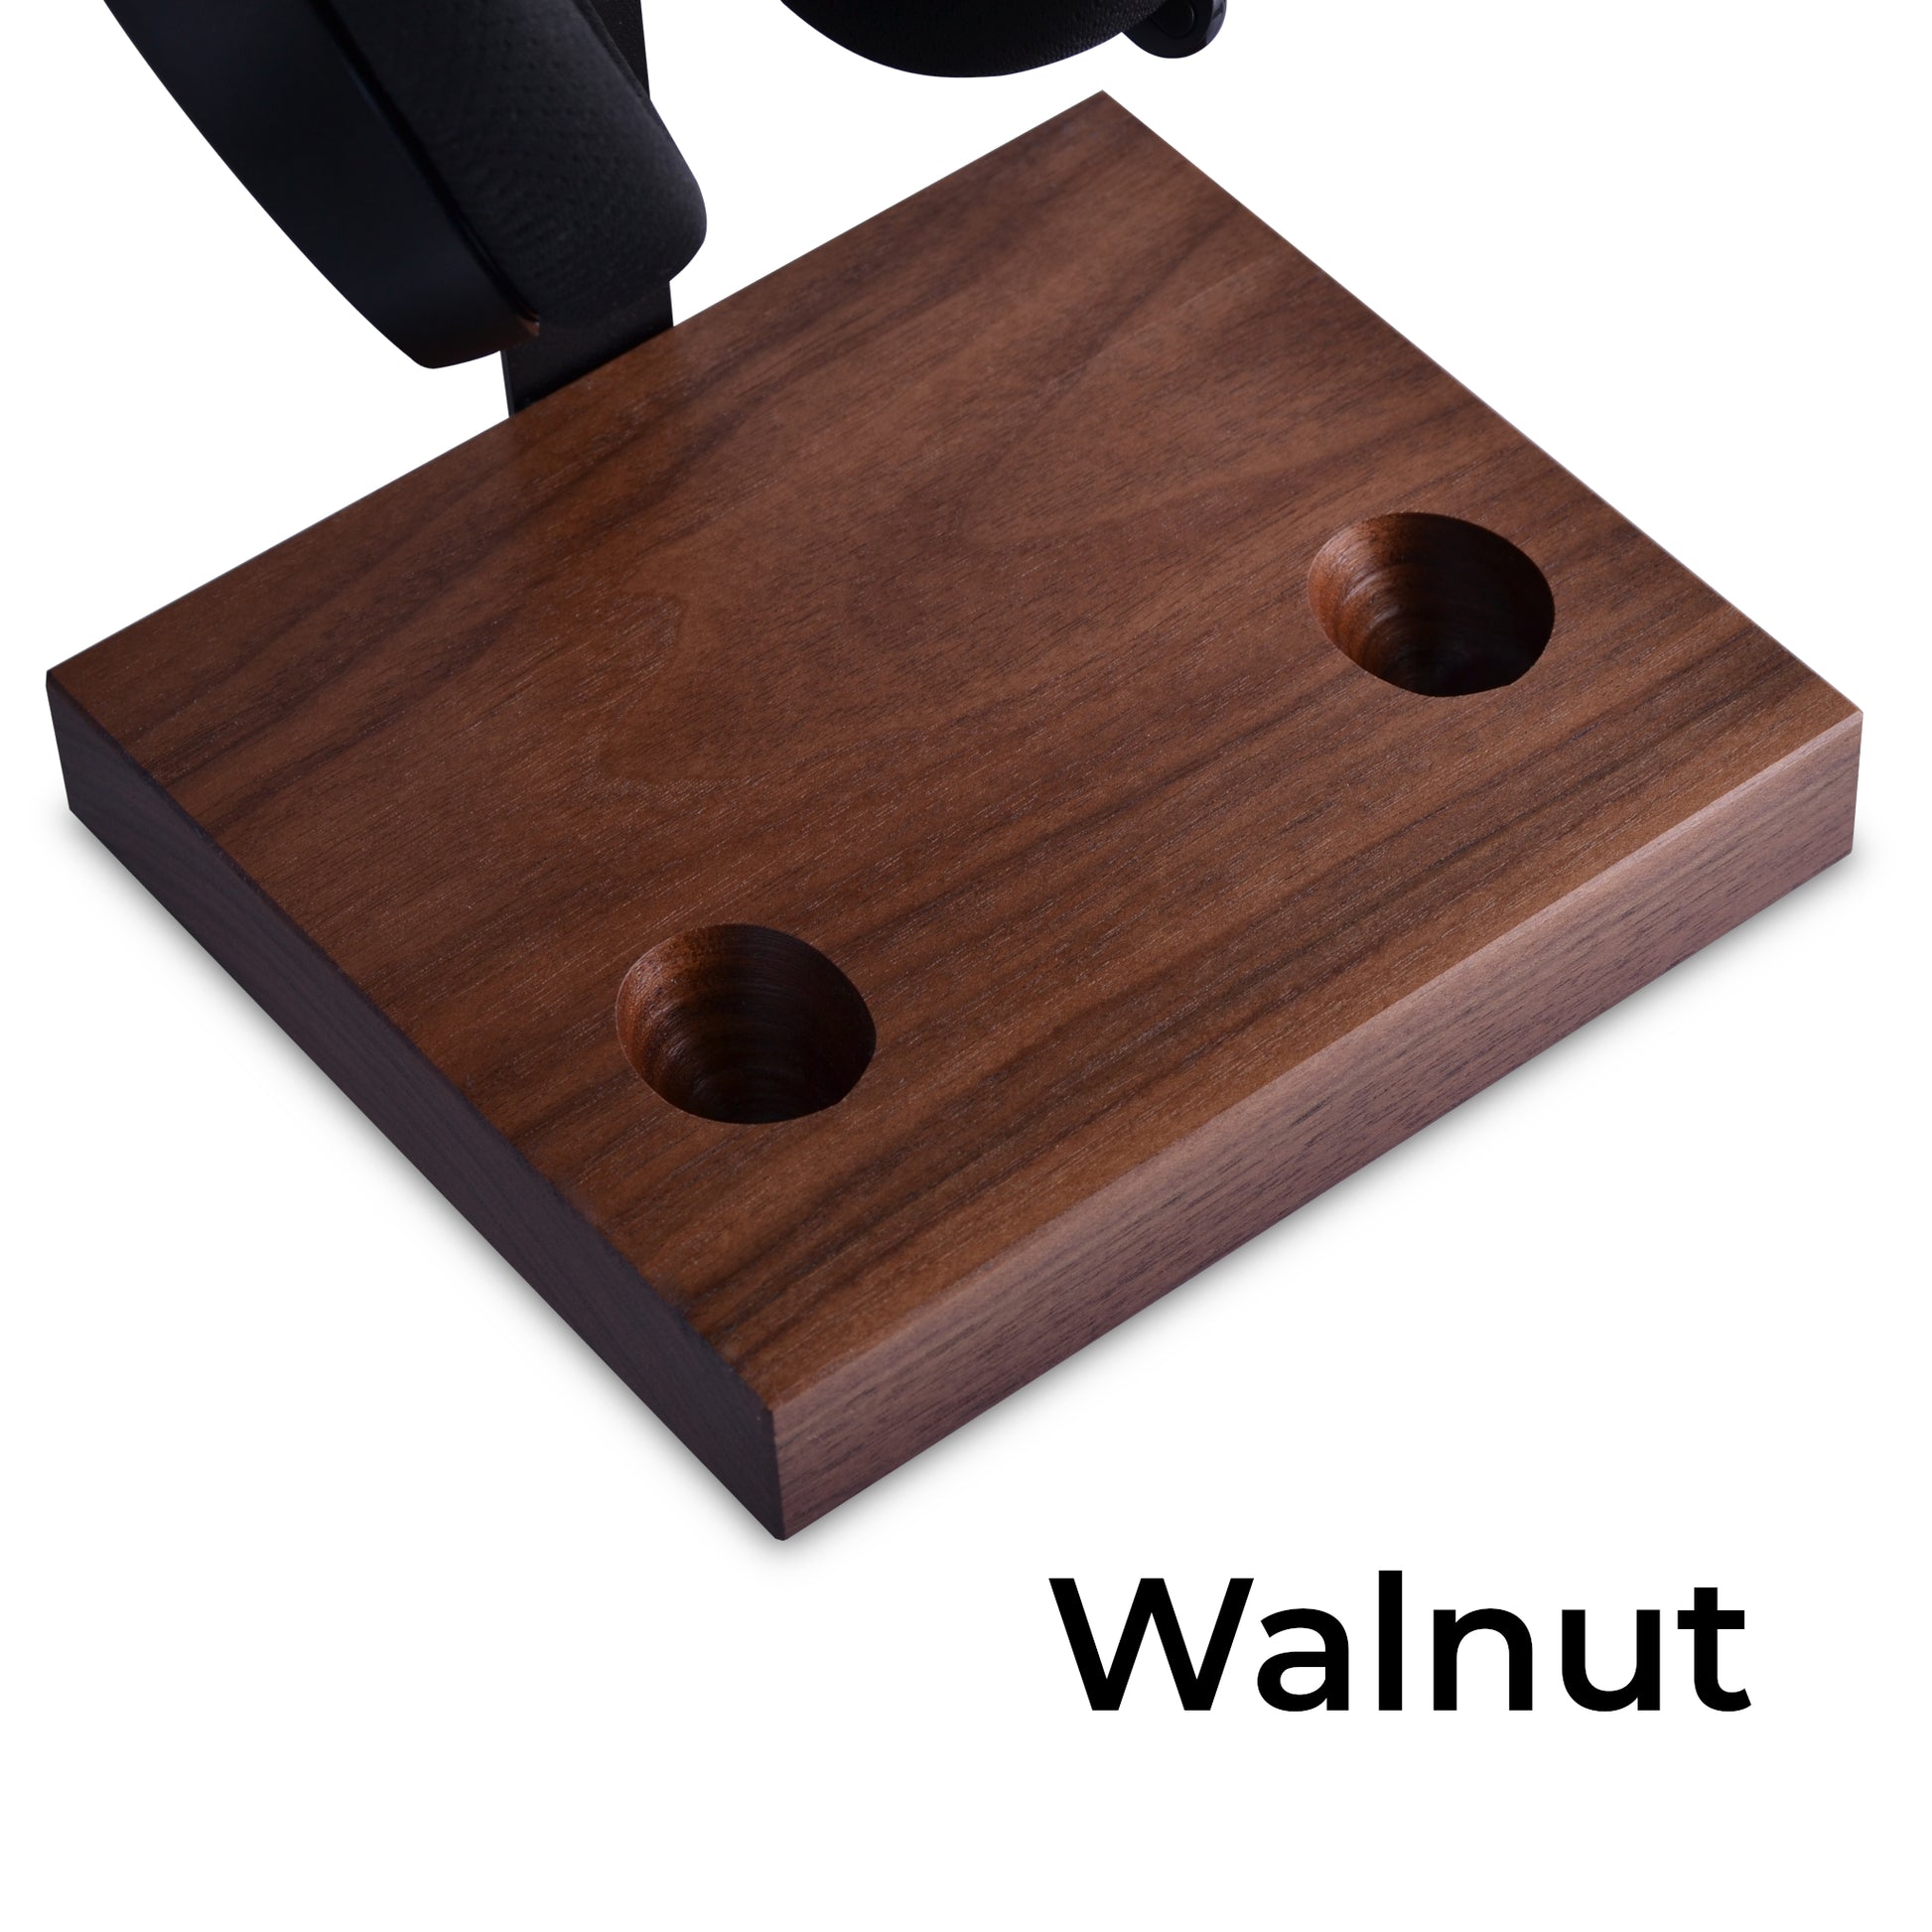 Walnut version of headset and controller stand for Nintendo Switch pro controller